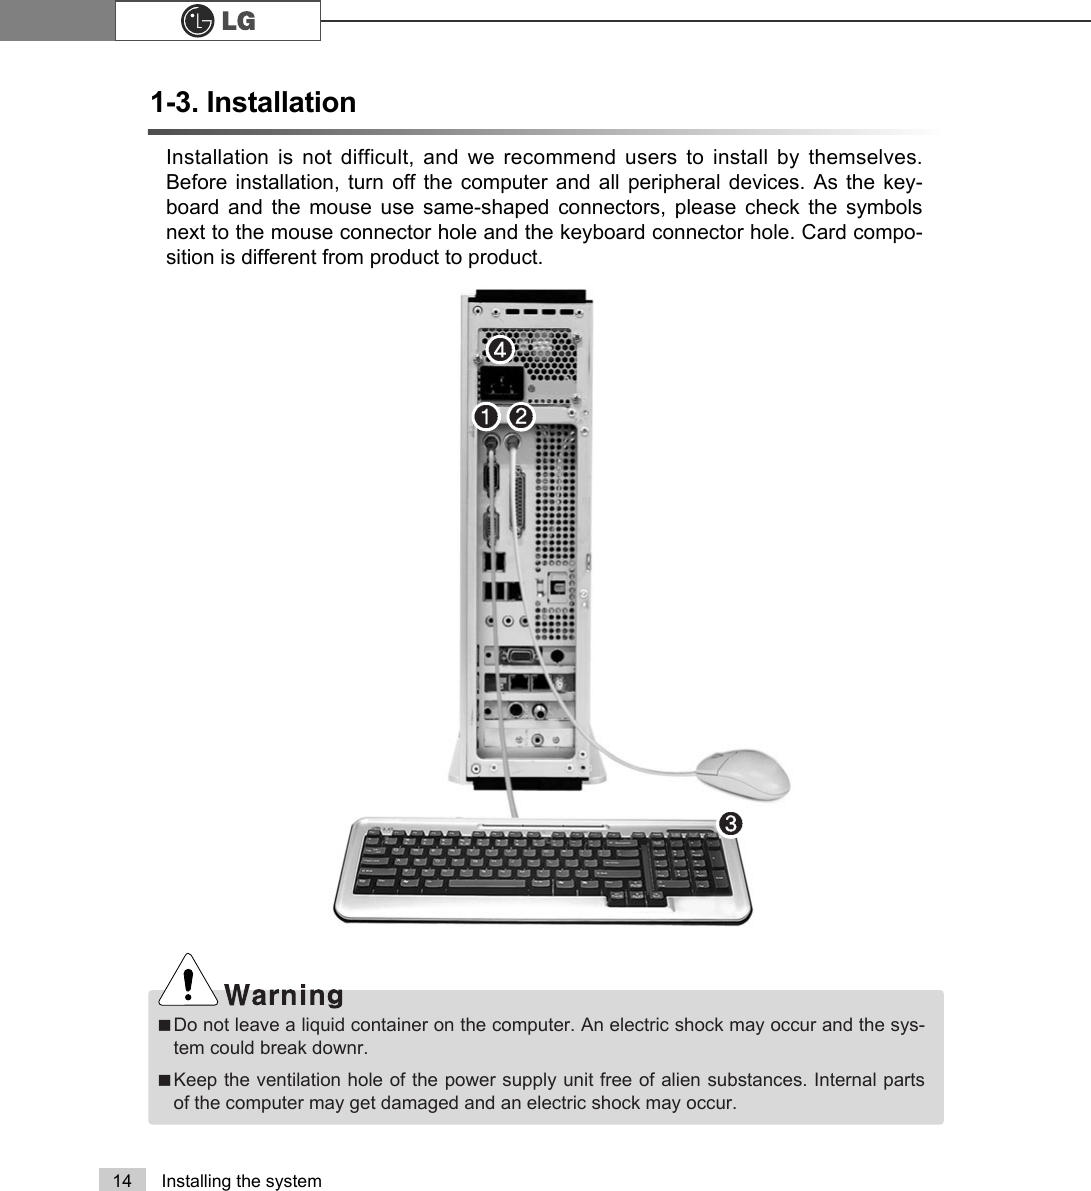 14 Installing the system1-3. InstallationInstallation is not difficult, and we recommend users to install by themselves.Before installation, turn off the computer and all peripheral devices. As the key-board and the mouse use same-shaped connectors, please check the symbolsnext to the mouse connector hole and the keyboard connector hole. Card compo-sition is different from product to product.ãDo not leave a liquid container on the computer. An electric shock may occur and the sys-tem could break downr.ãKeep the ventilation hole of the power supply unit free of alien substances. Internal partsof the computer may get damaged and an electric shock may occur.℘ℙℚℛ